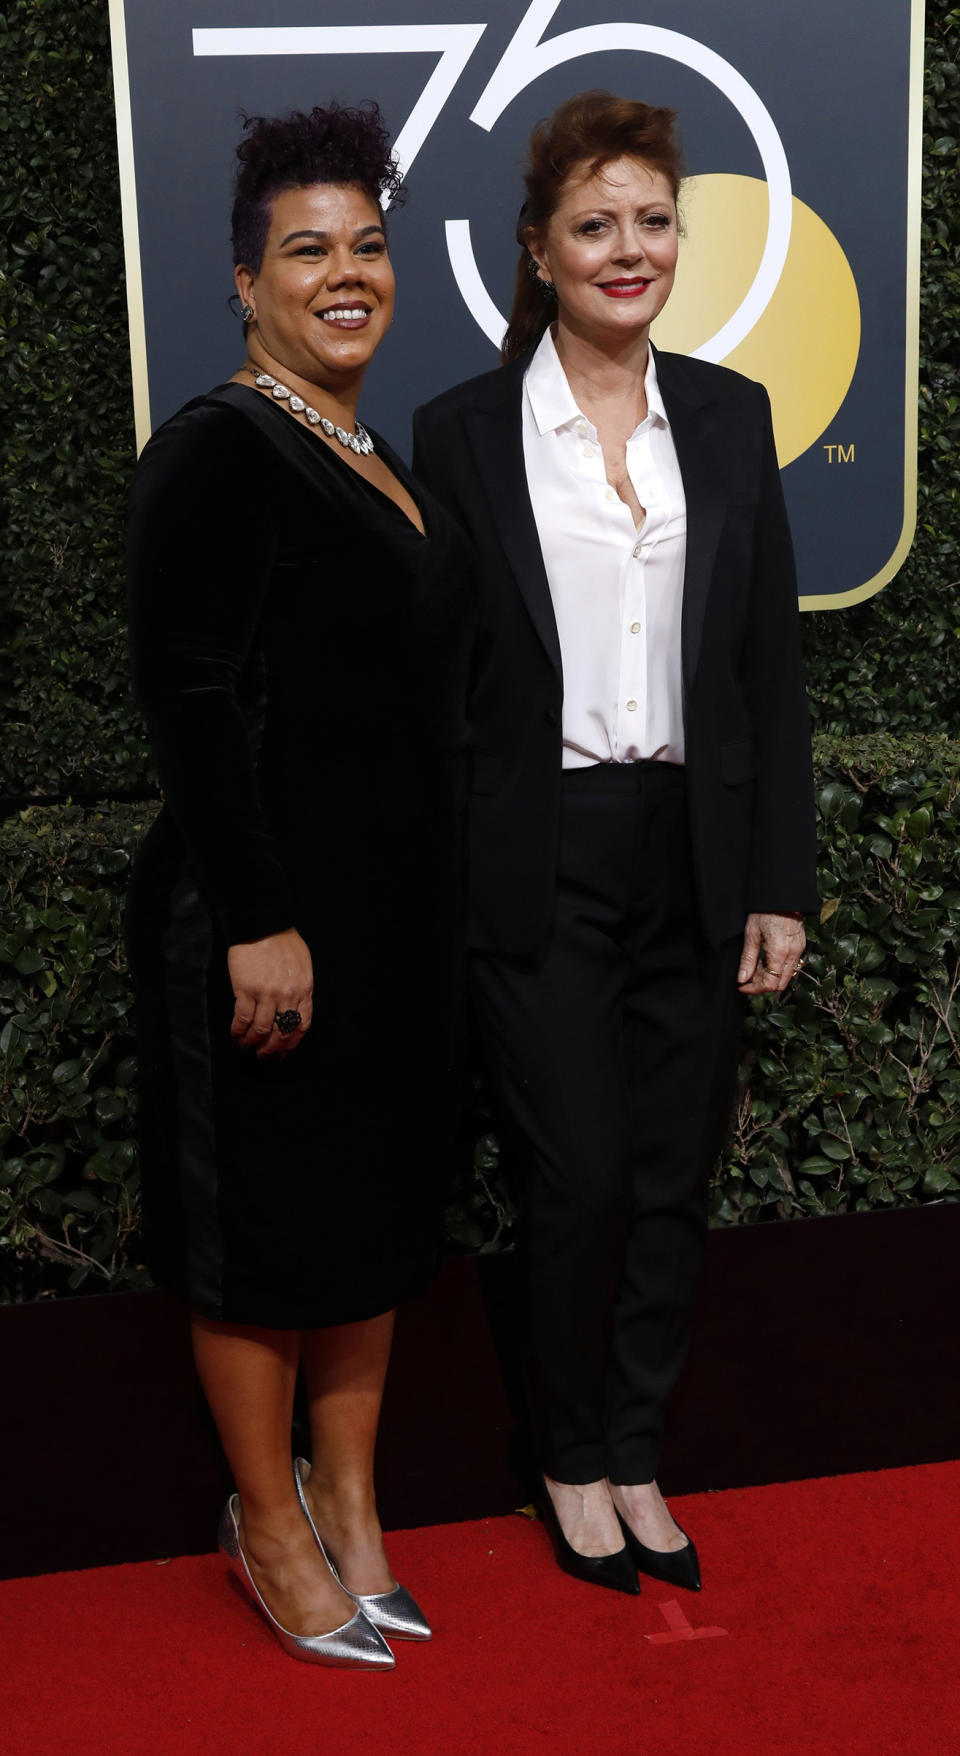 Activist Rosa Clemente and actress Susan Sarandon at the 75th annual Golden Globes, Beverly Hills, Calif, Jan. 7, 2018.